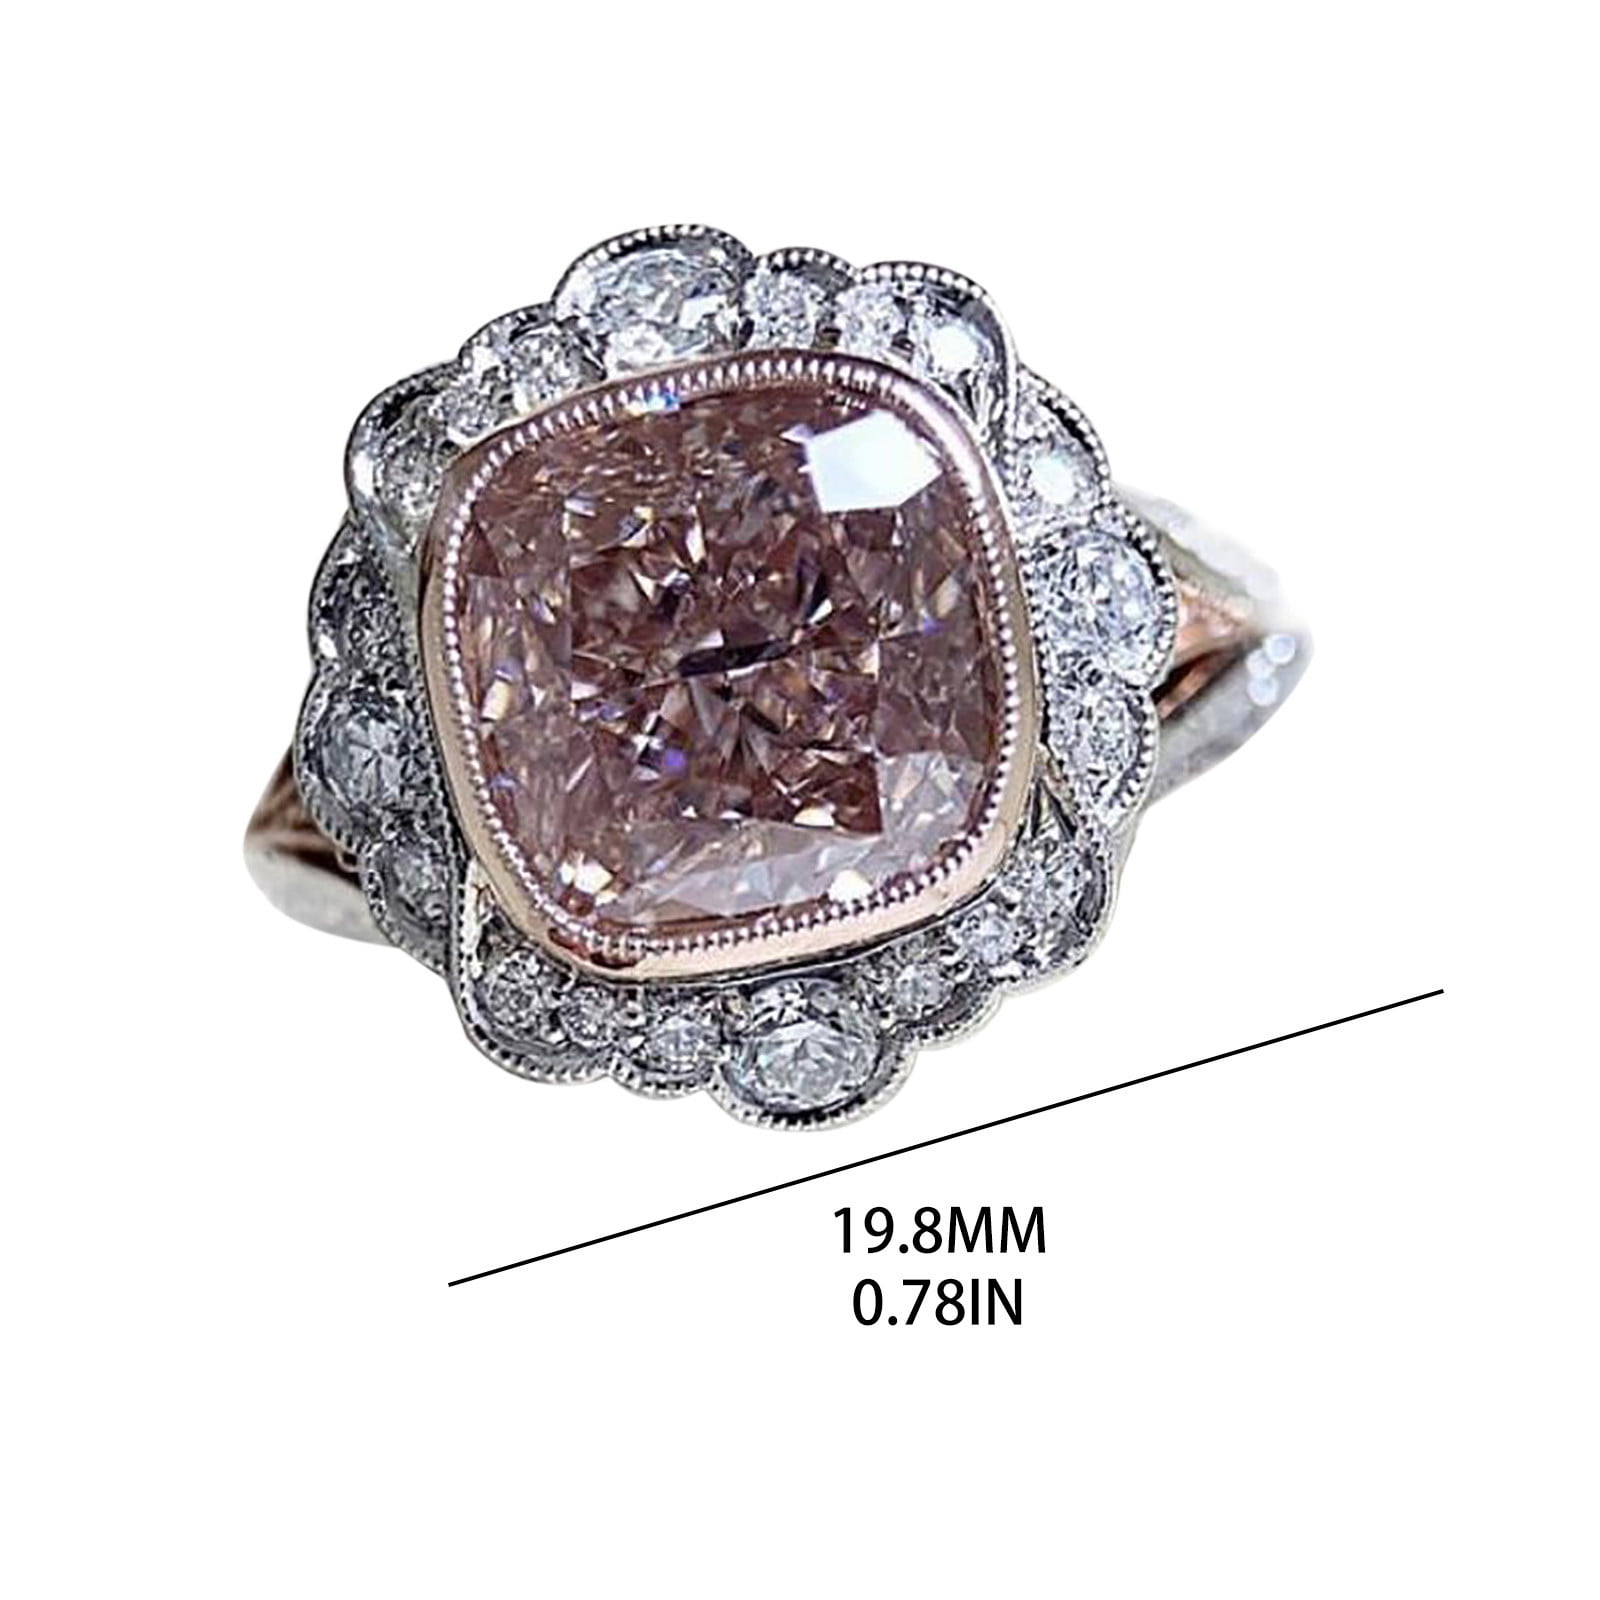 Details about   Slice Rose Cut Pave Diamond Victorian Styel 925Silver Ring Wedding Gift For Wife 